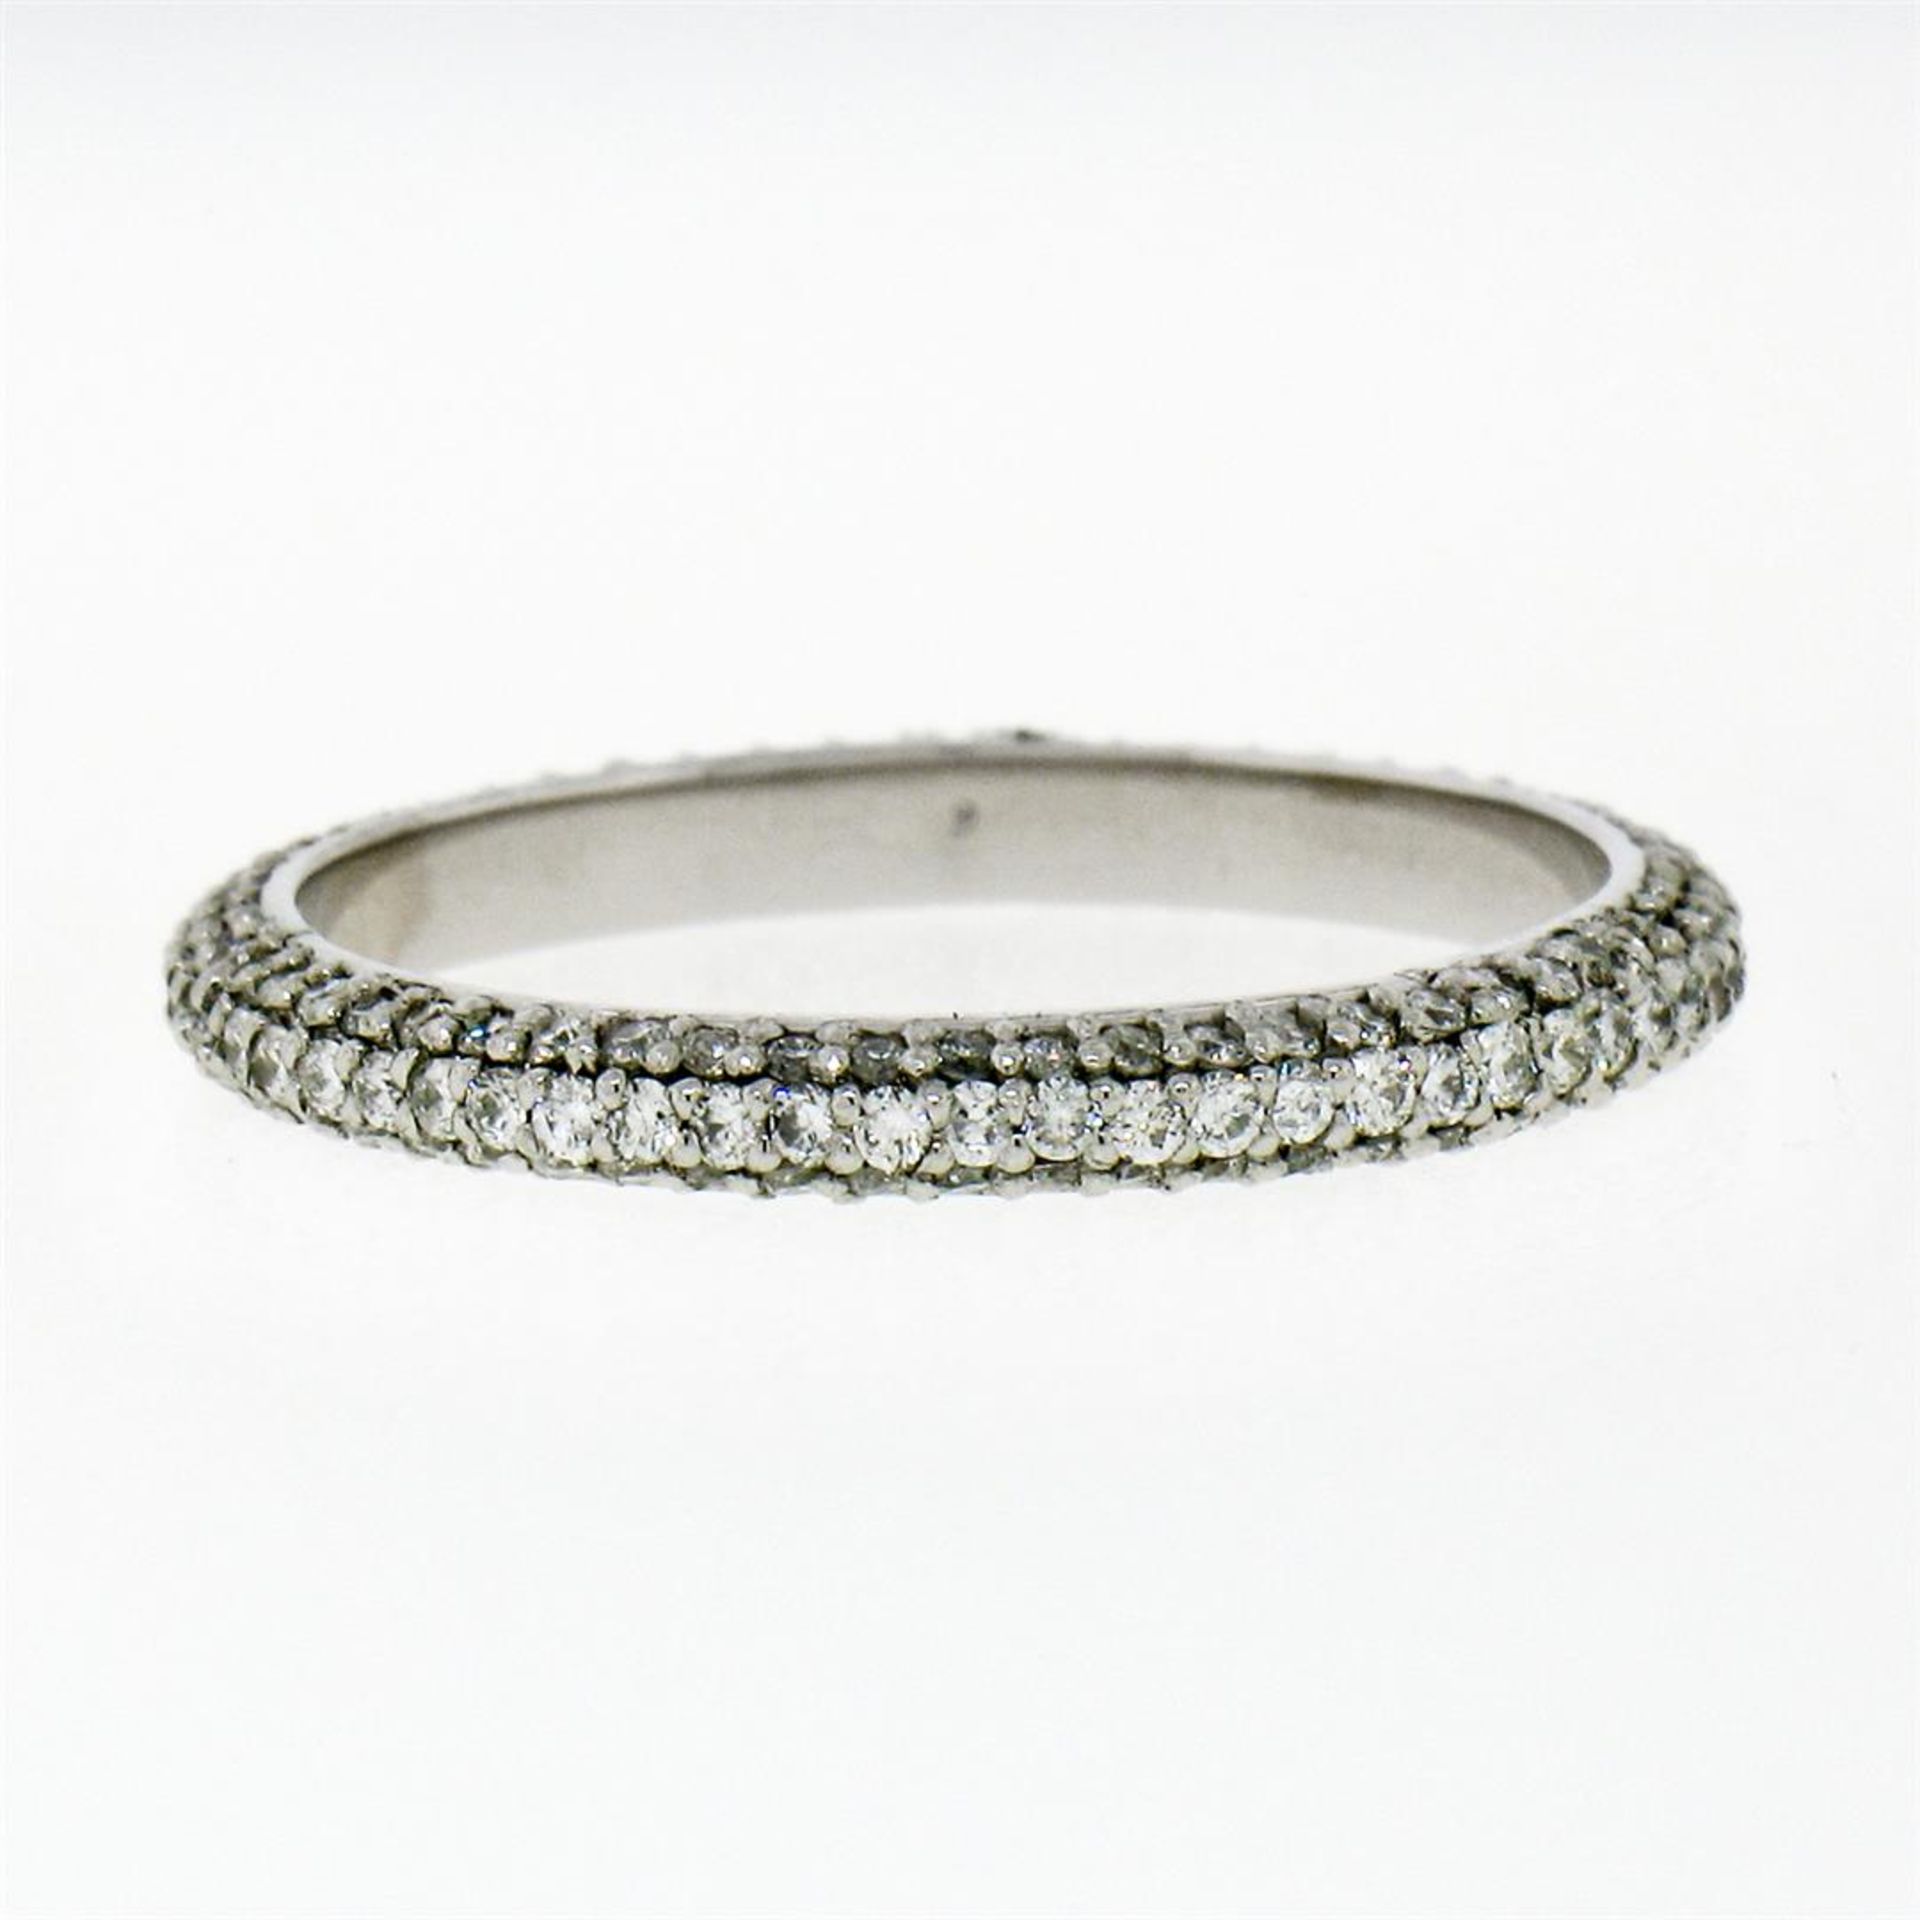 14K White Gold .85ctw Diamond 2.30mm Domed 3 Row Eternity Wedding Band Ring - Image 6 of 6